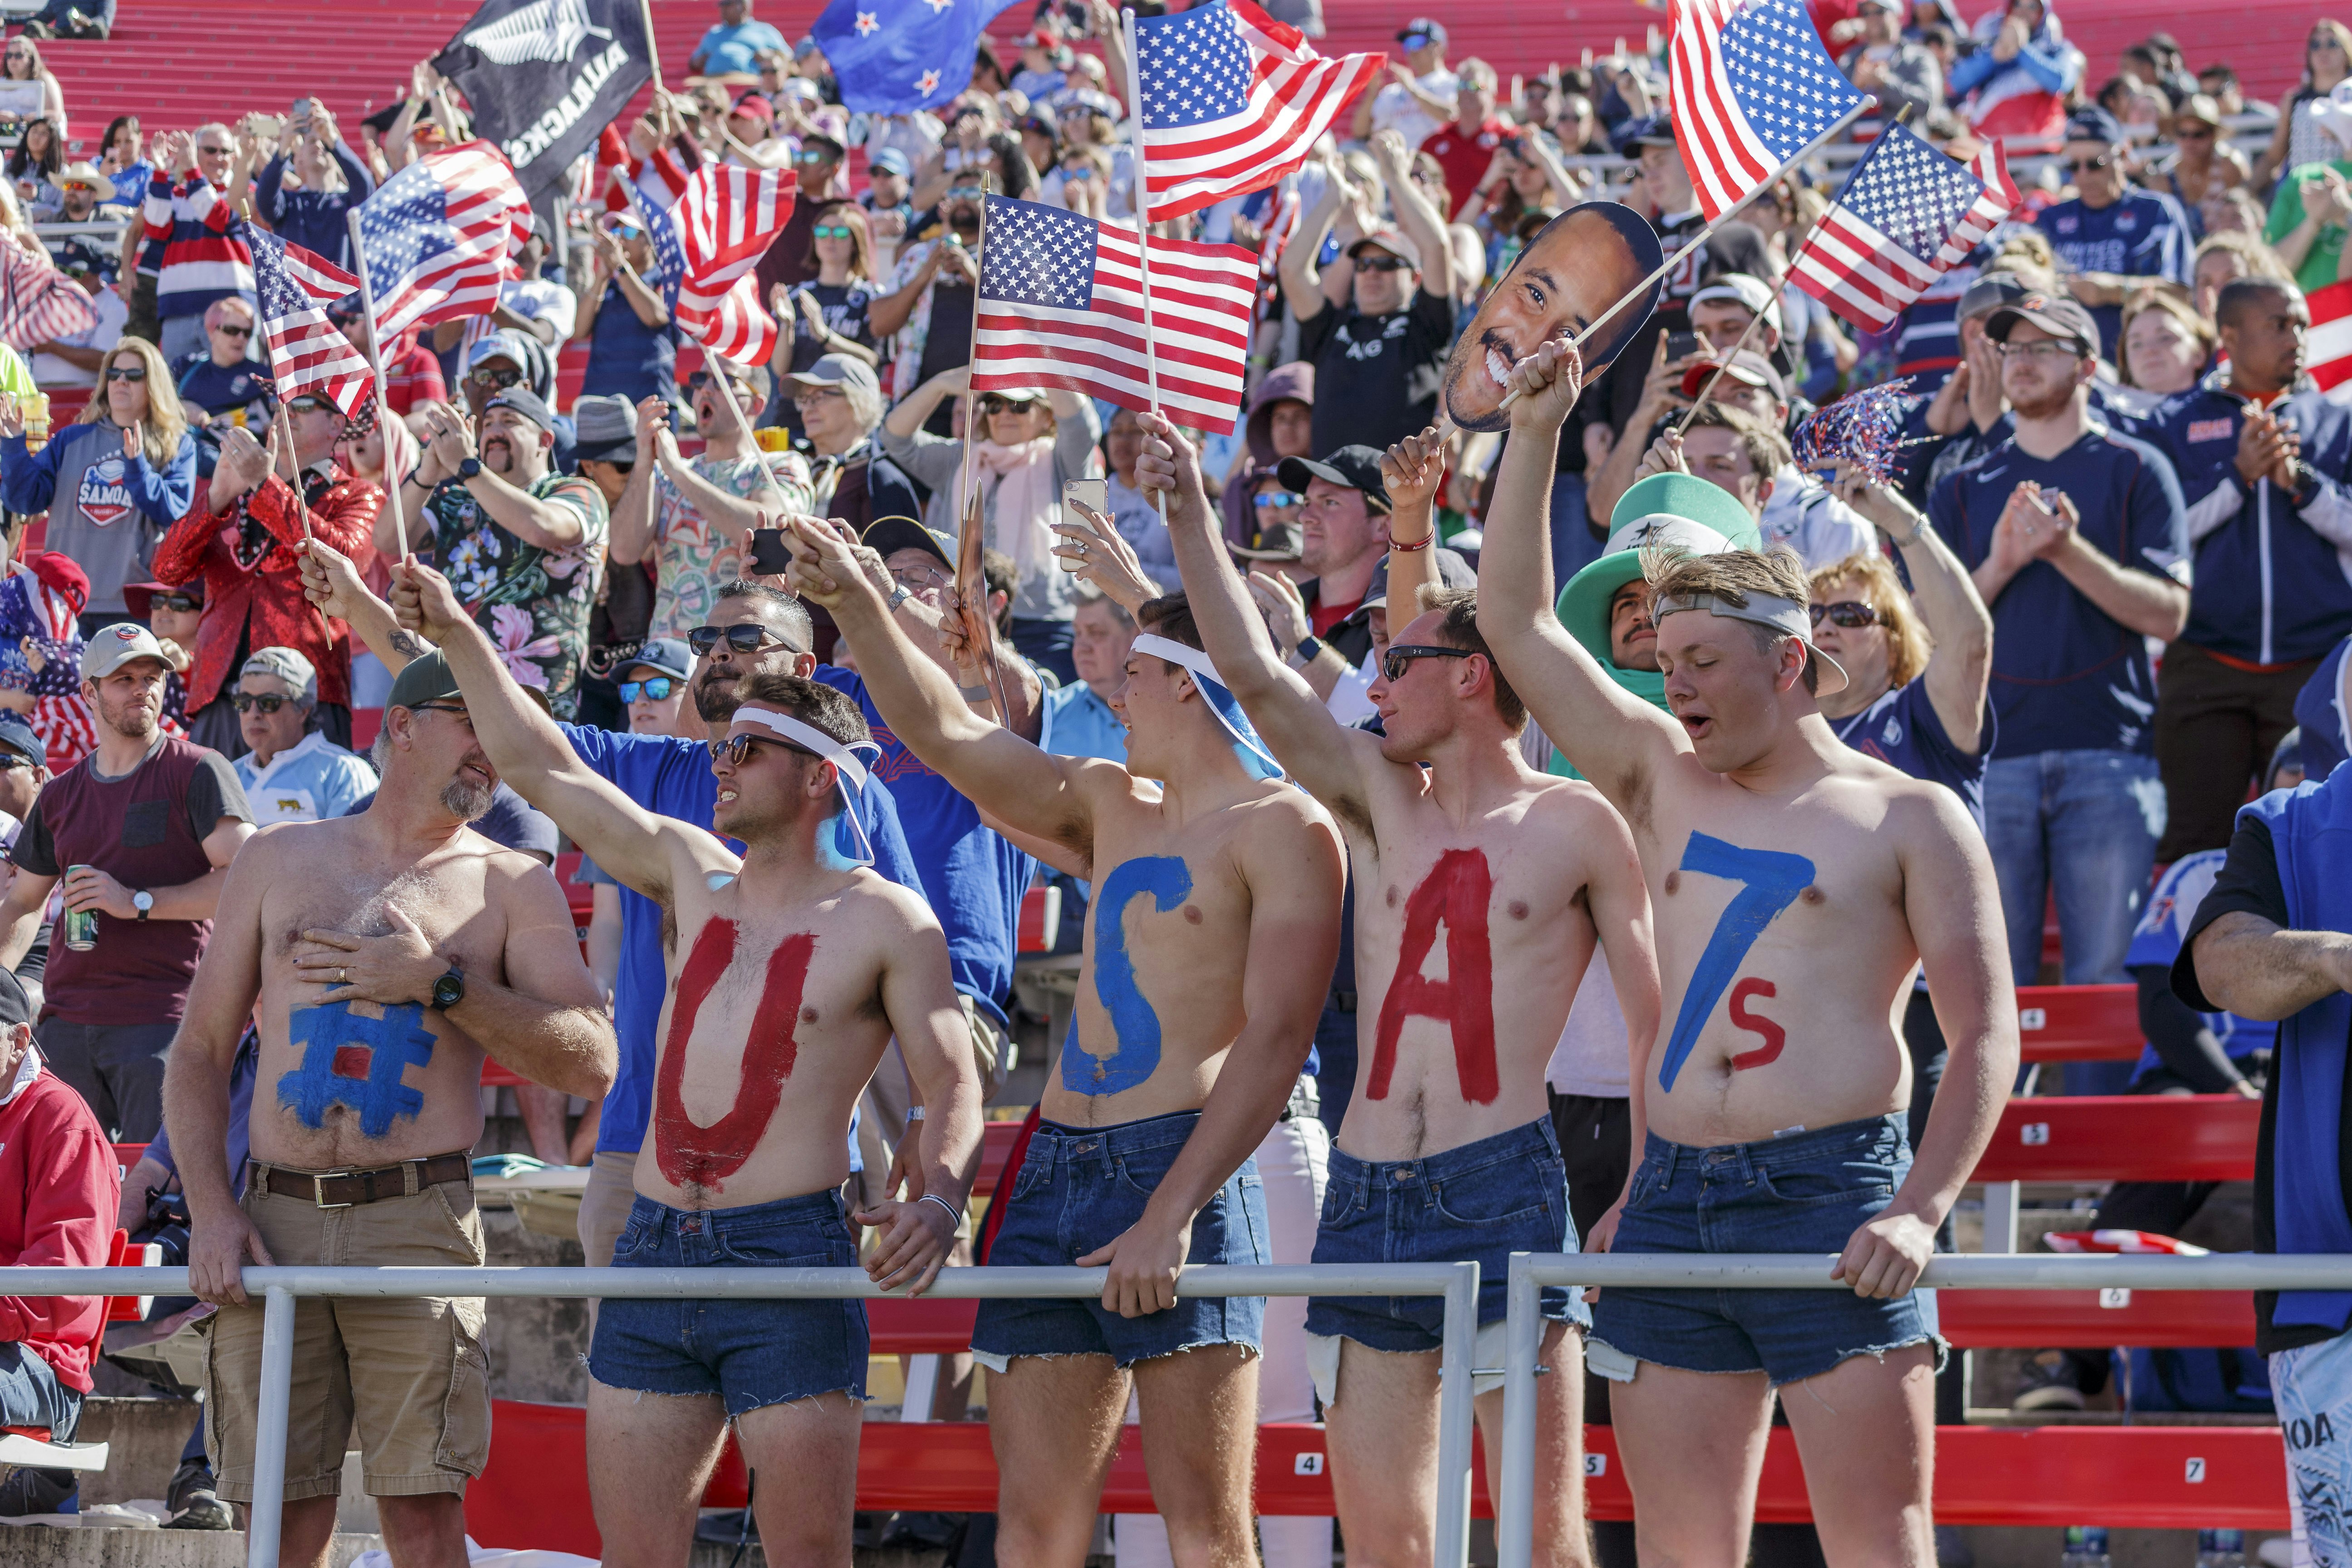 Five USA fans stand topless in the stands at the USA Rugby Sevens tournament in Las Vegas. Each of the five has a letter or symbol on their chest, which spells out: '#USA7s'. Behind them other fans clap and wave flags.